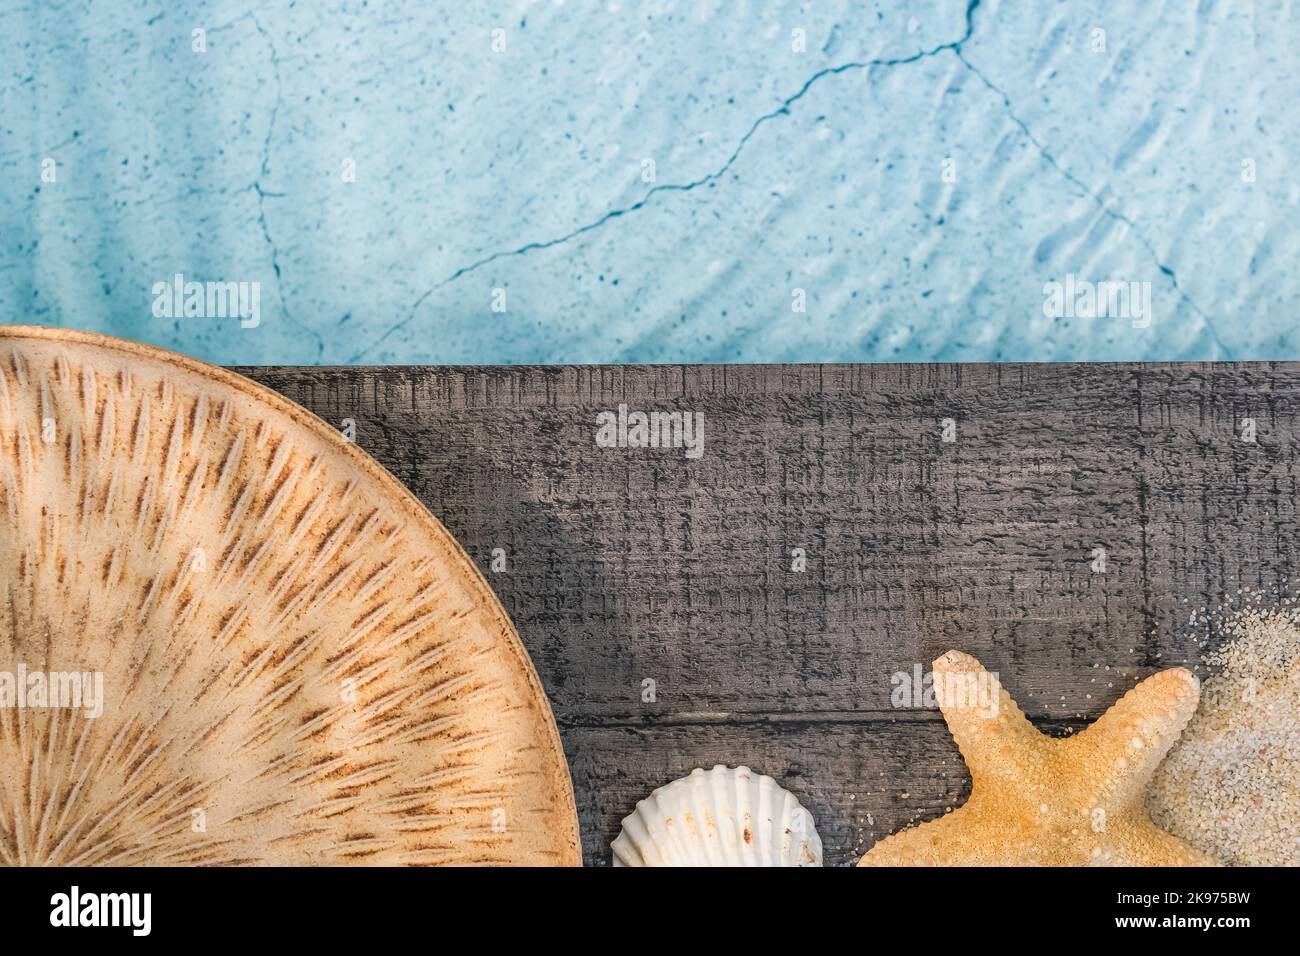 Exotic dish seen from above on a wooden floor above a pool with shells. Ambiance vacation in summer. Stock Photo